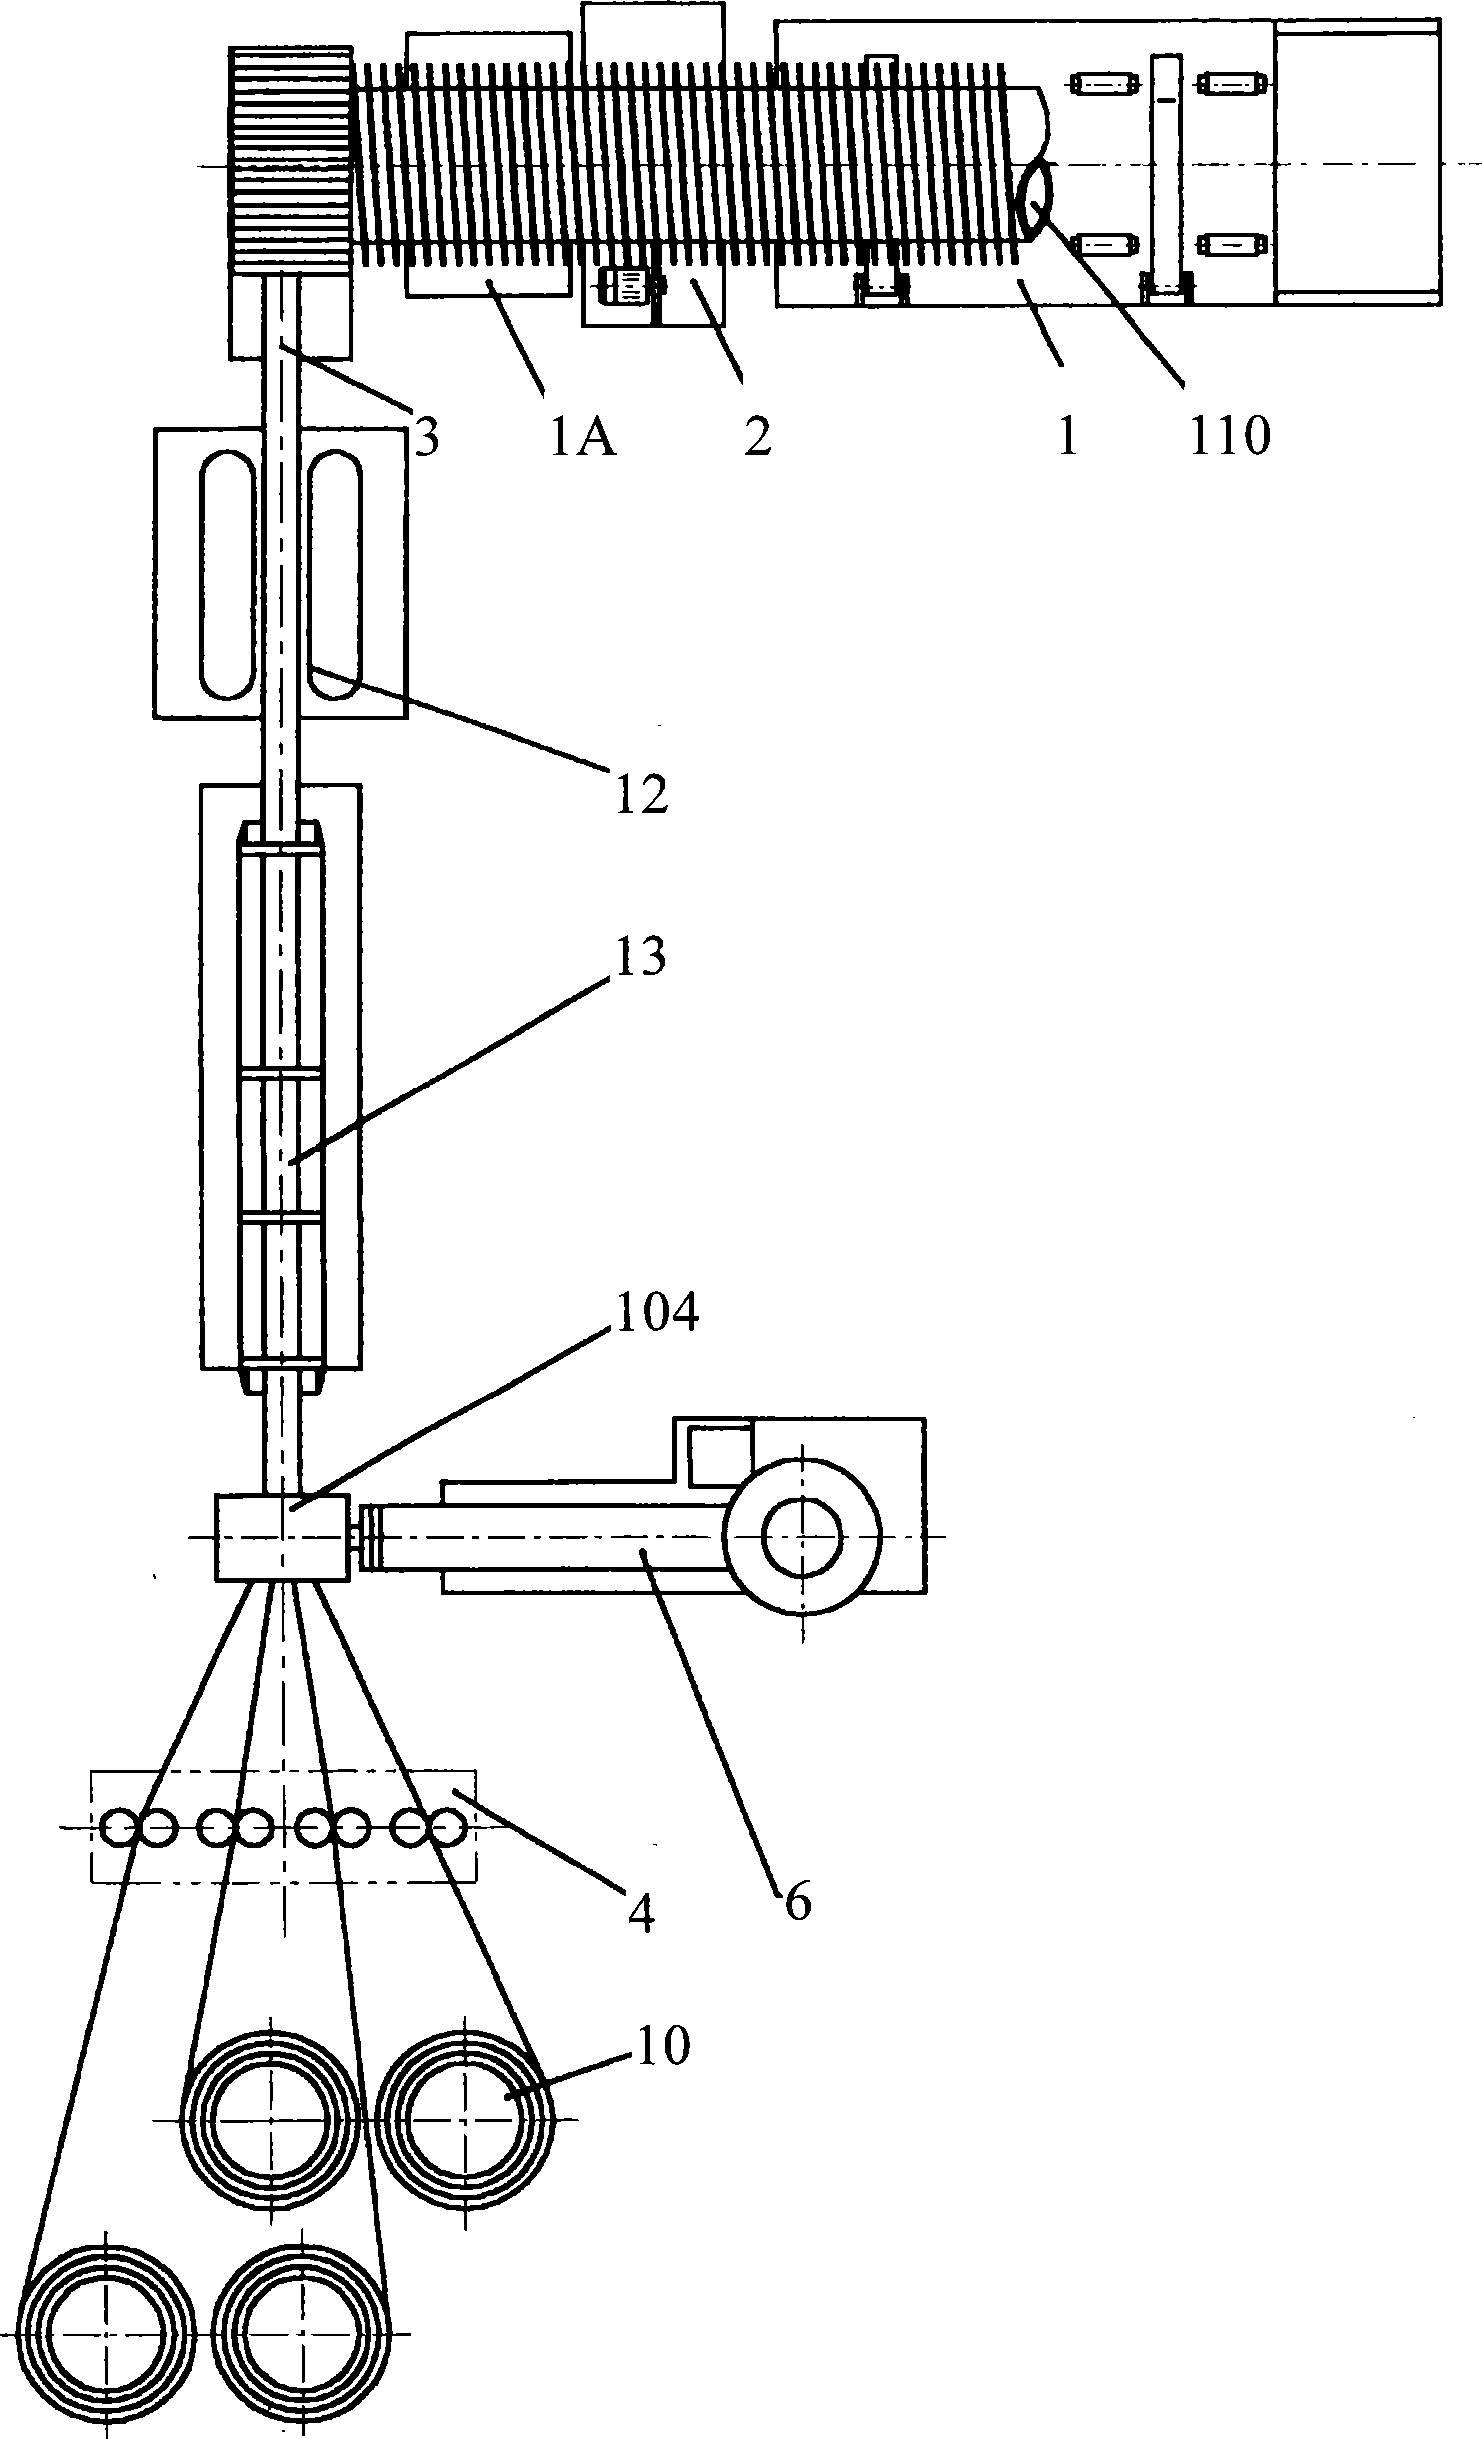 Winding-pipe production device